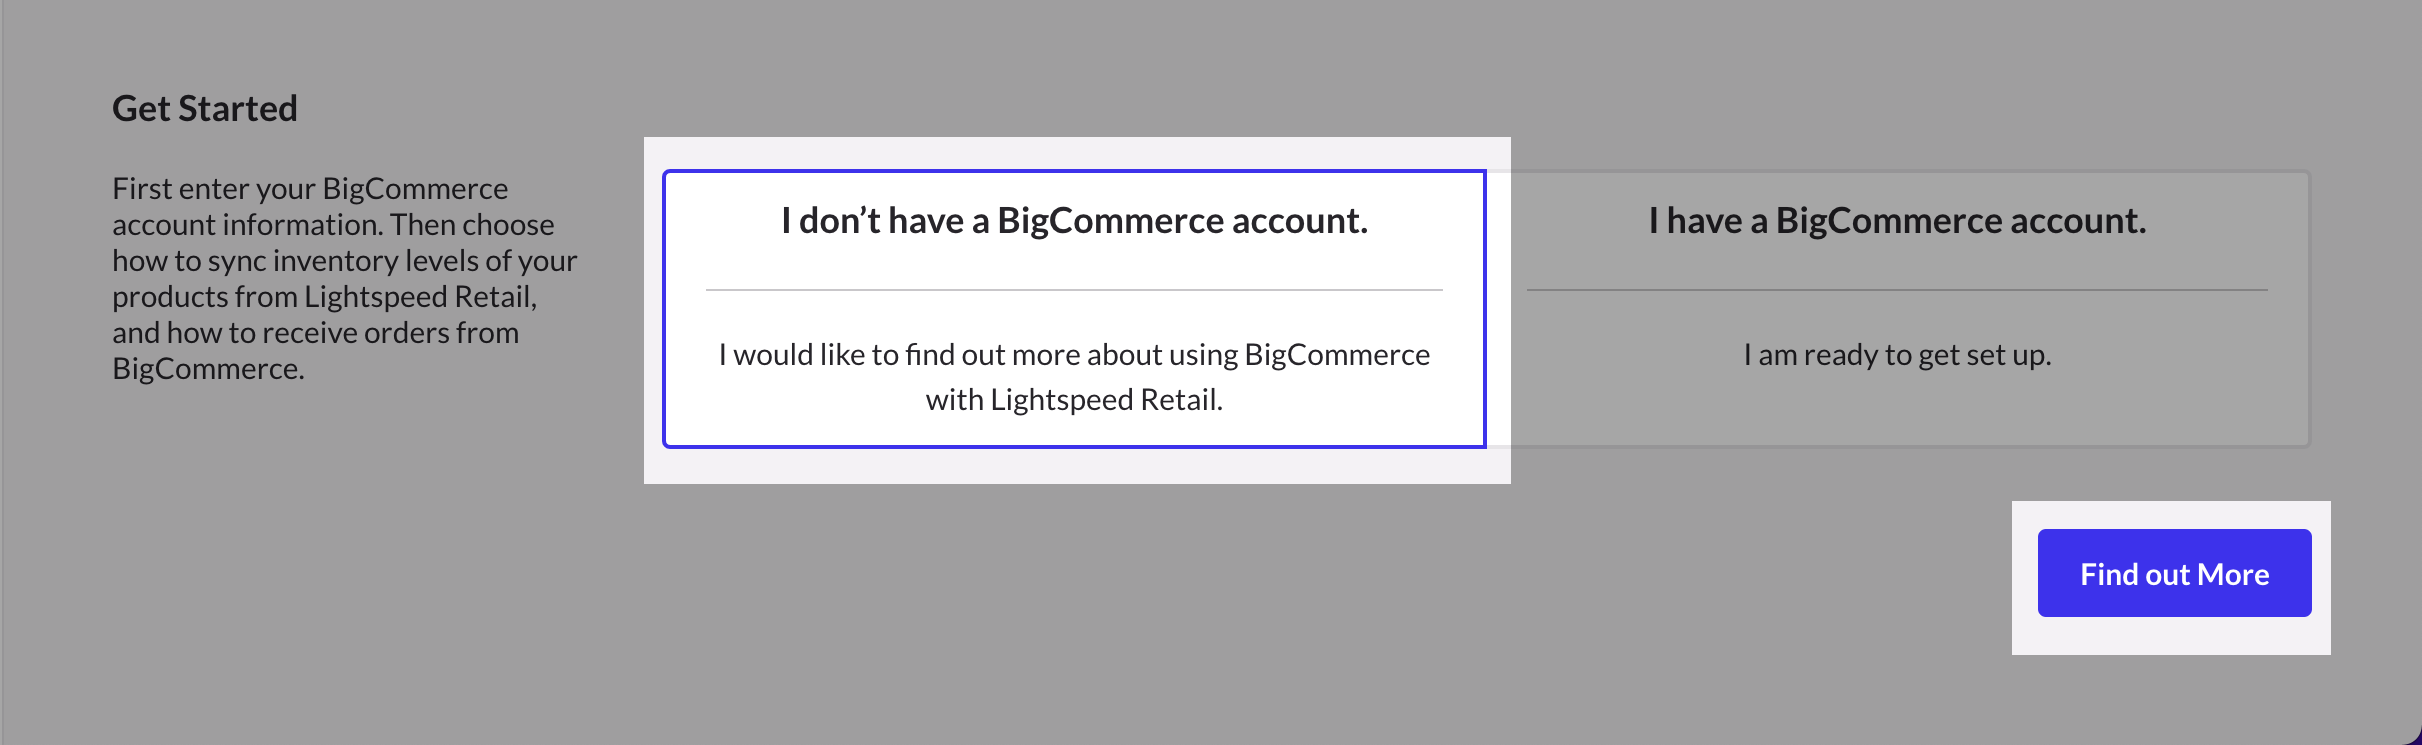 Big-Commerce-I-Don_t-Have-An-Account.png